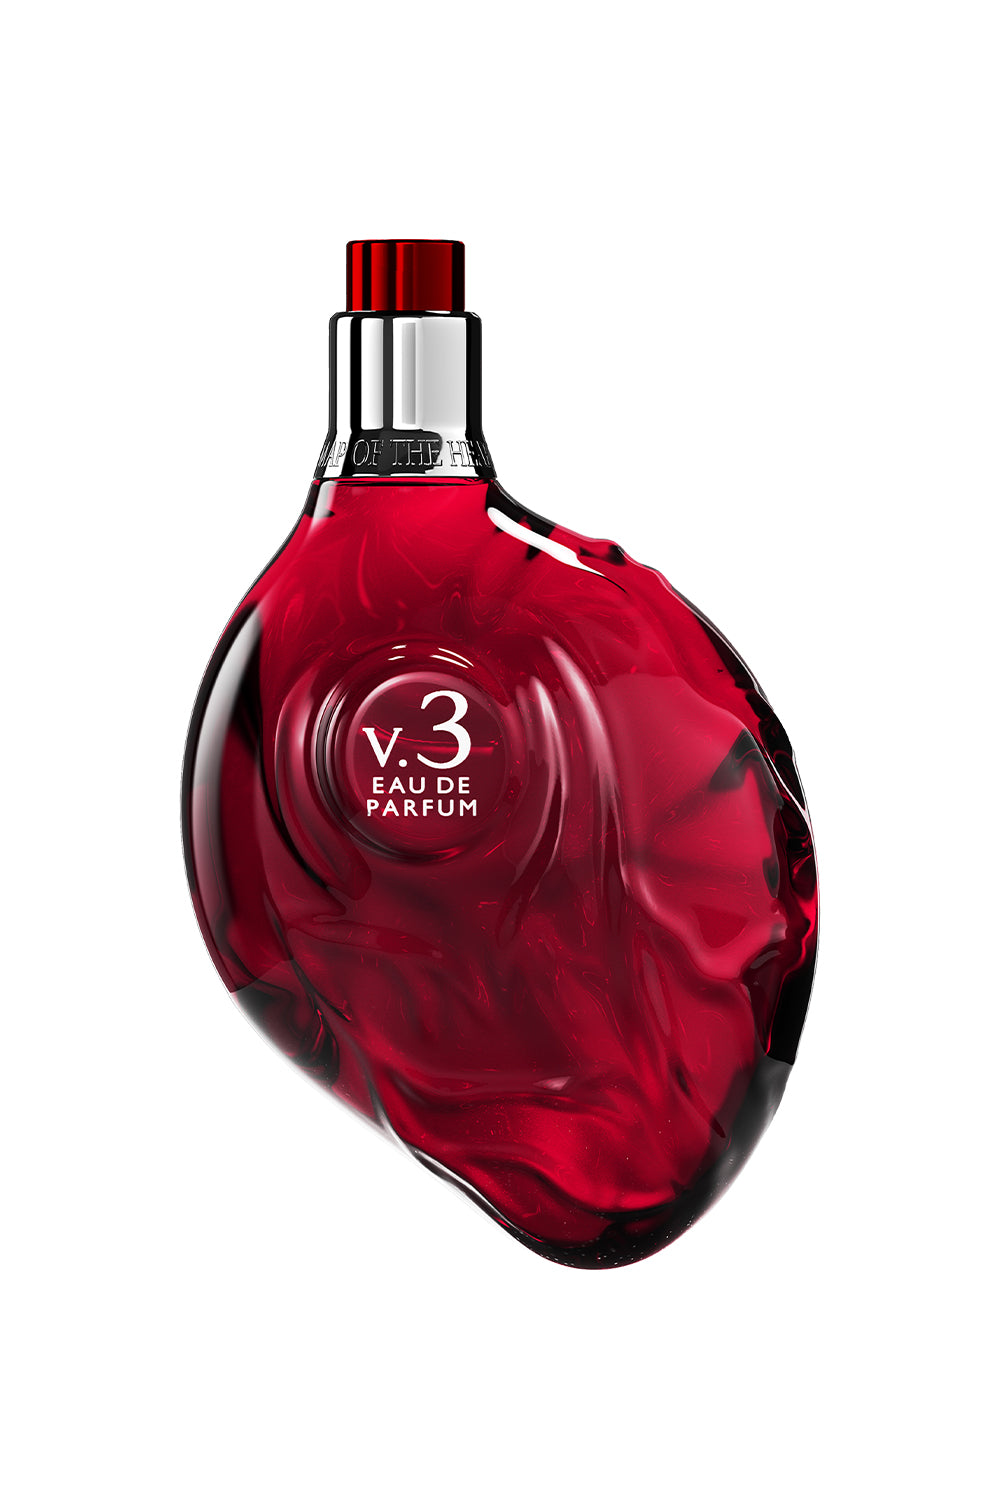 MAP OF THE HEART LIFESTYLE RED RED HEART V.3 90ML